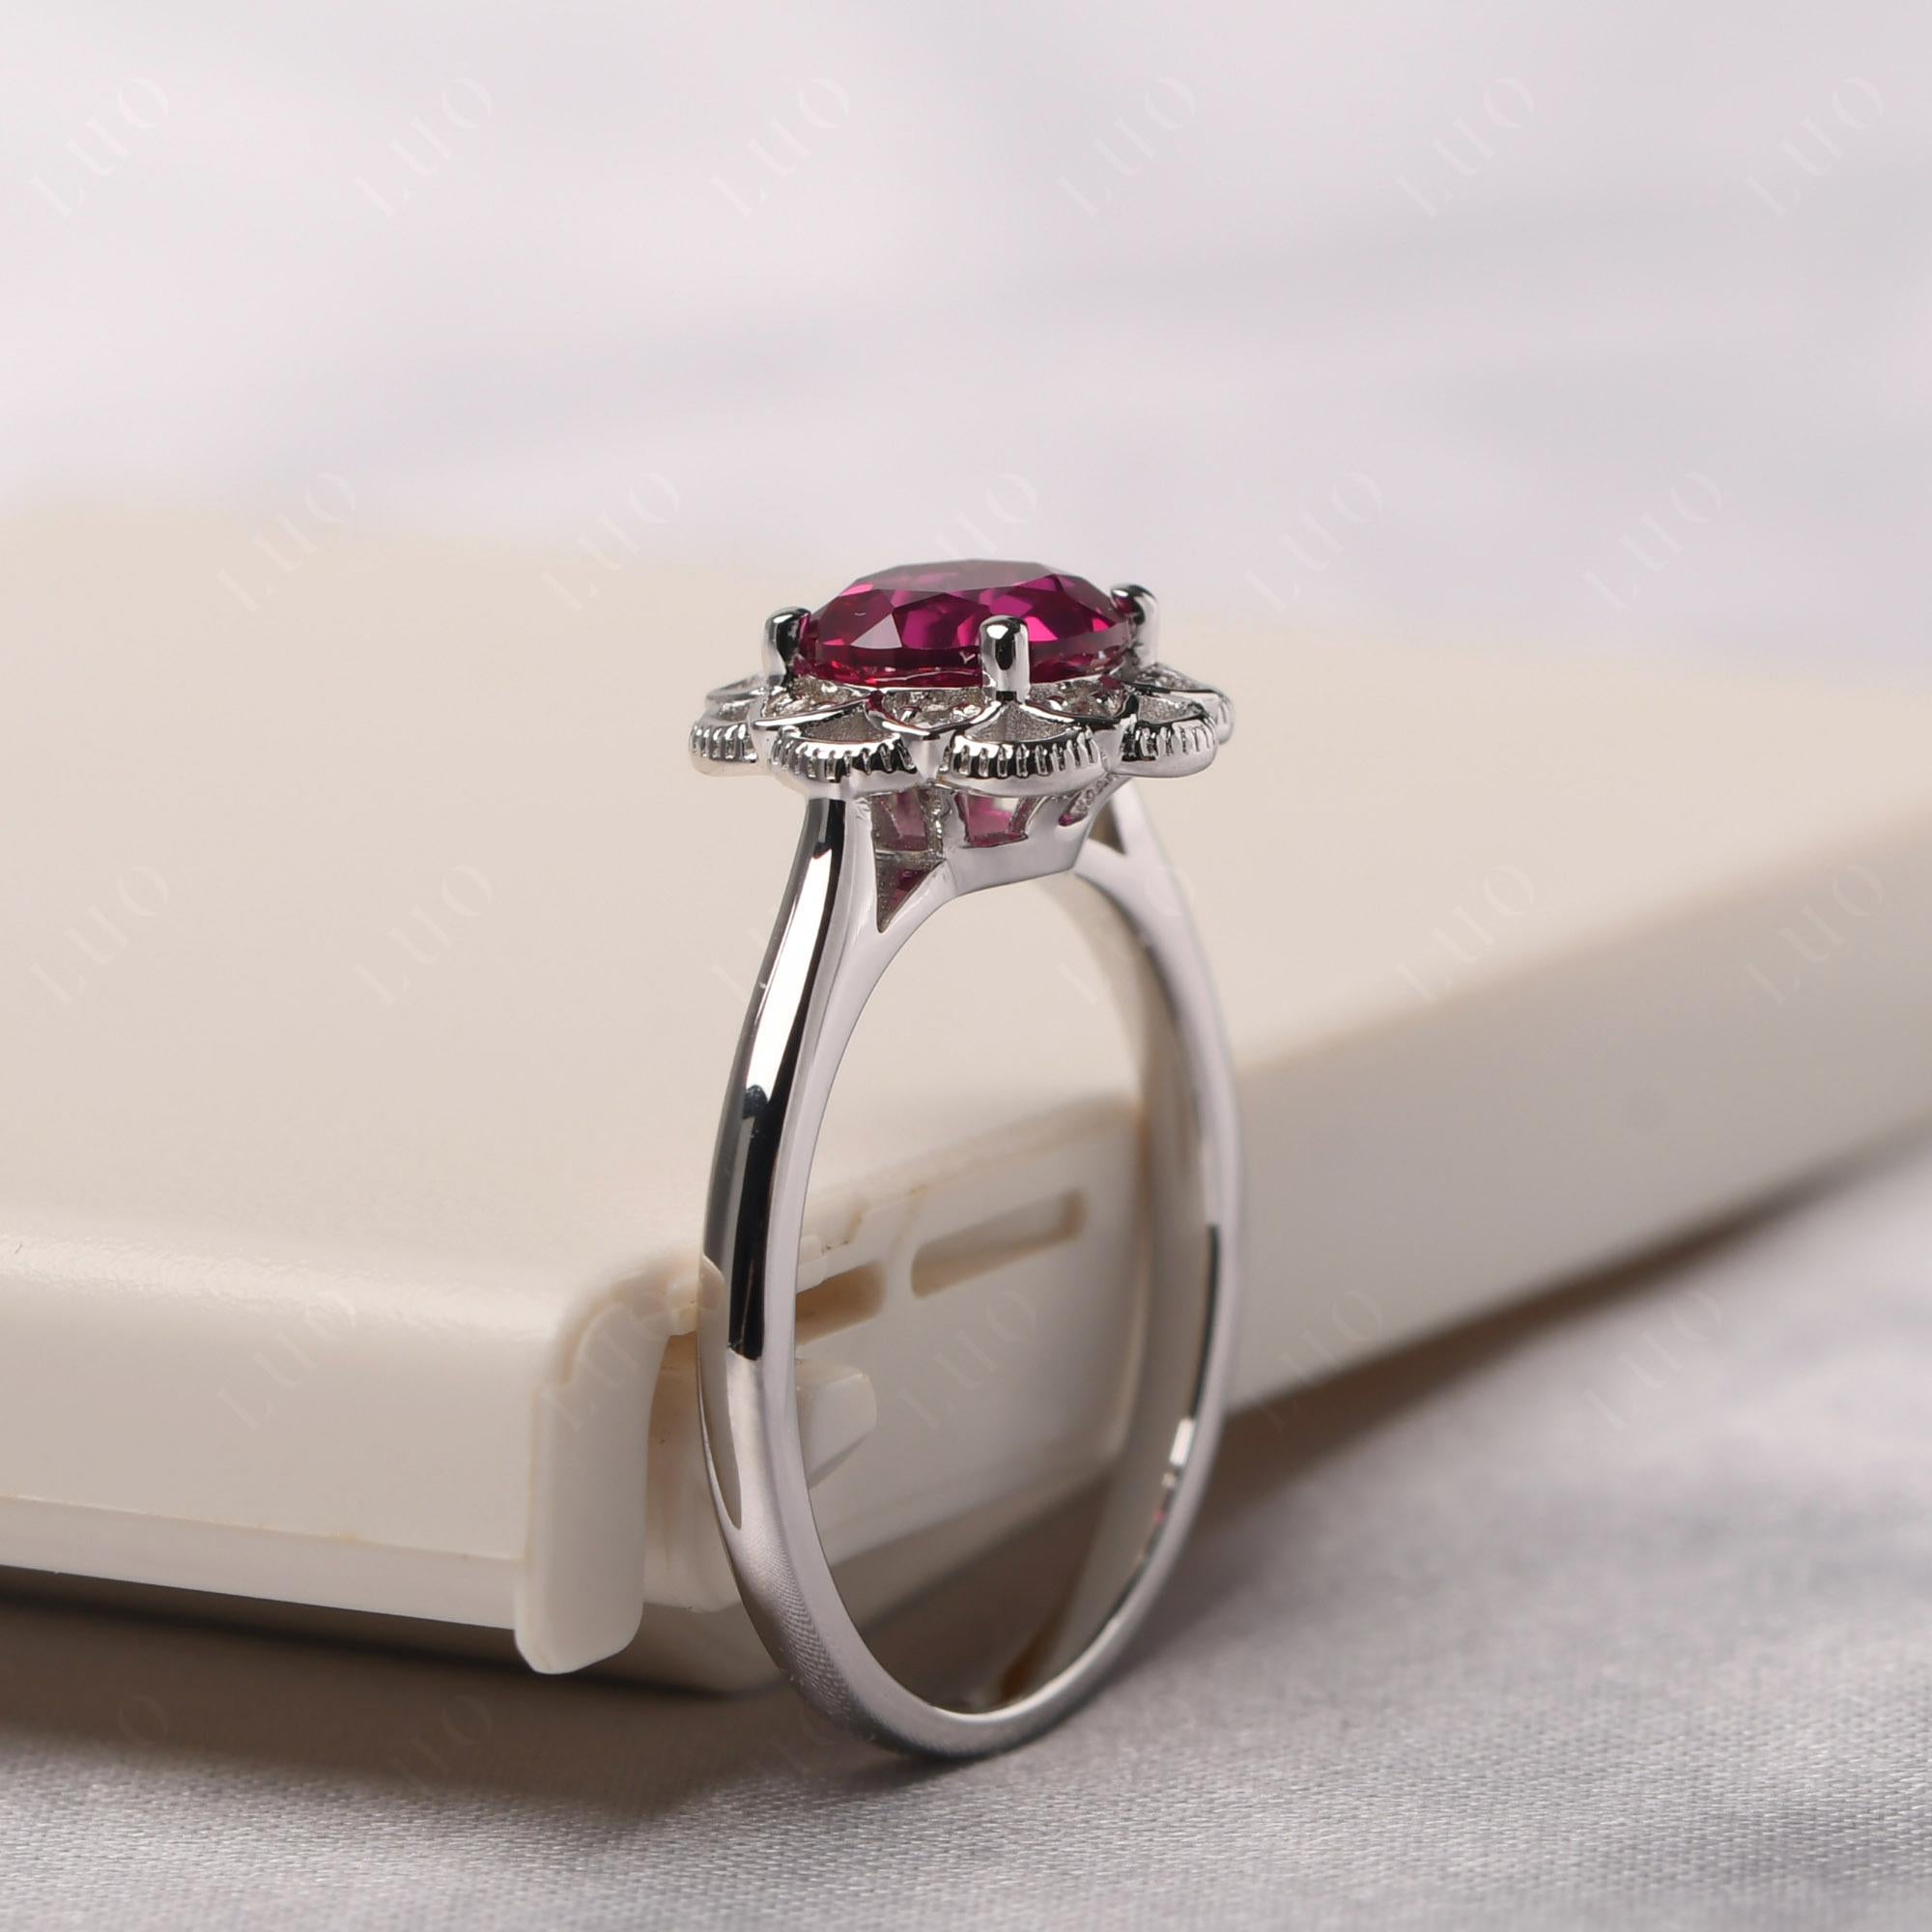 Ruby Vintage Inspired Filigree Ring - LUO Jewelry